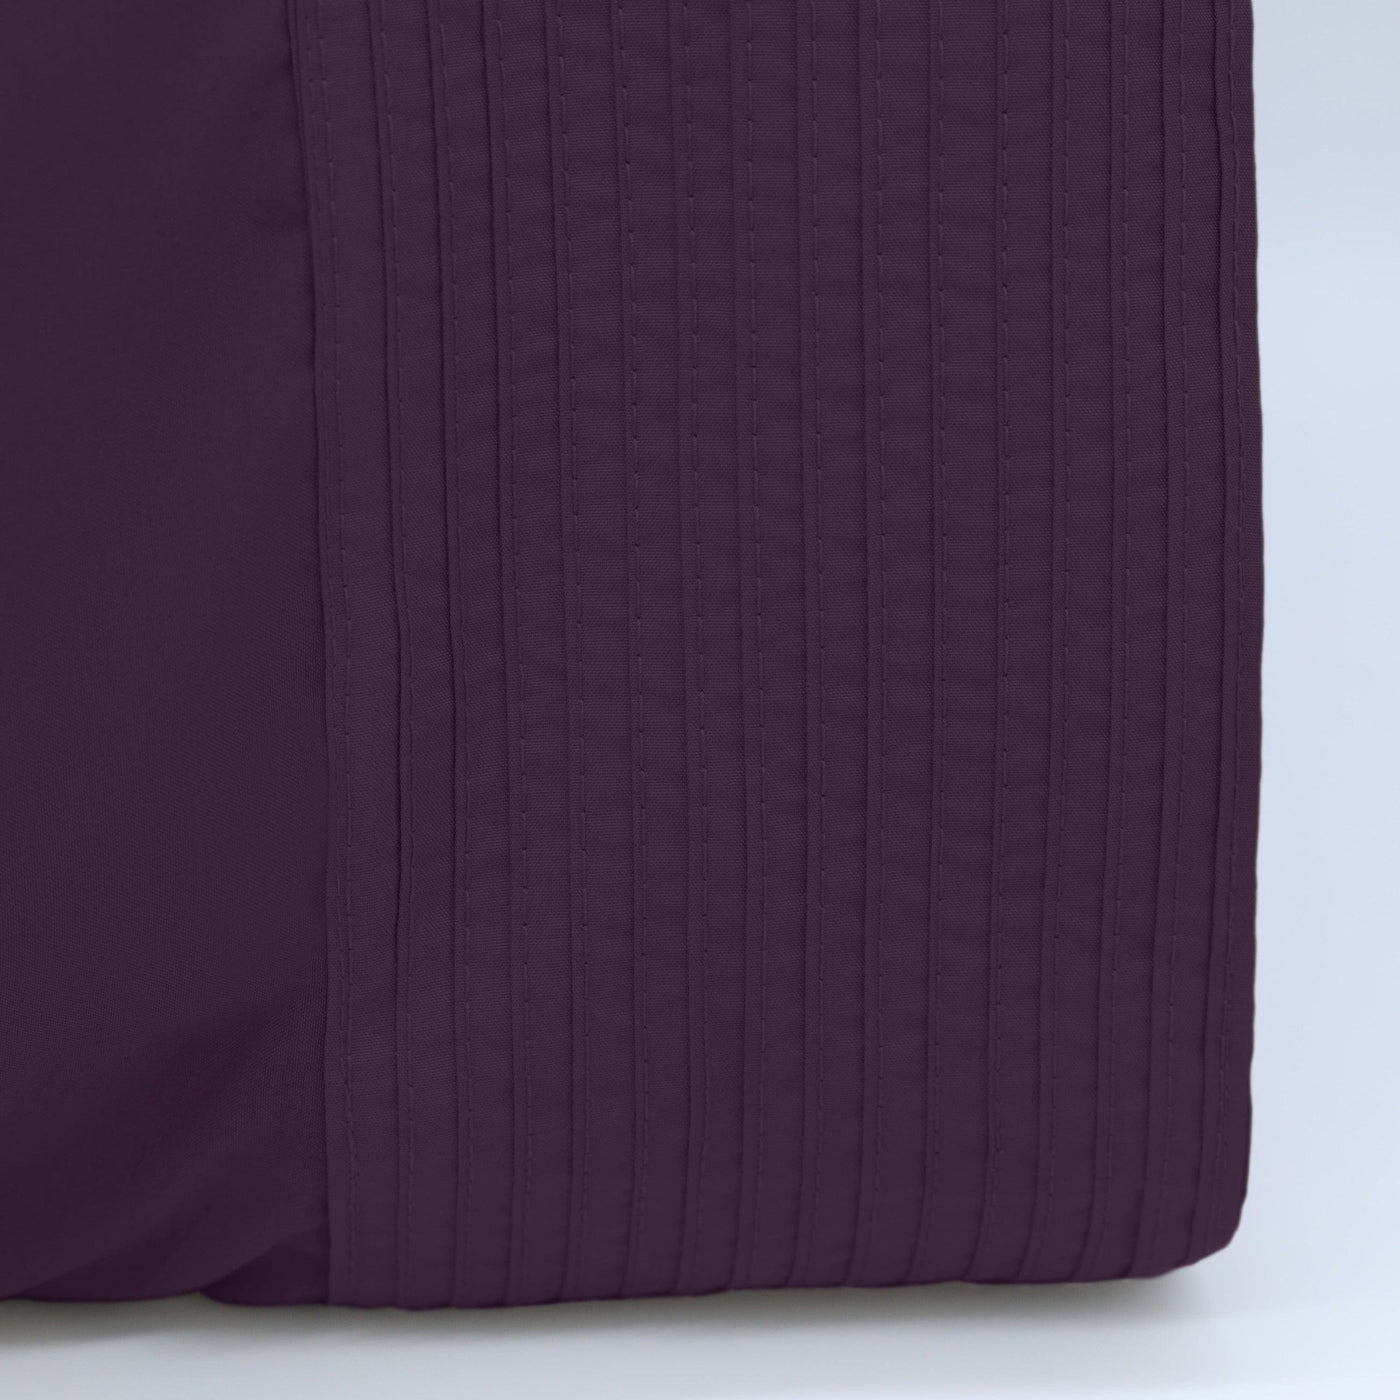 Details and Texture of Vilano Pleated Pillow Cases in Purple#color_vilano-purple